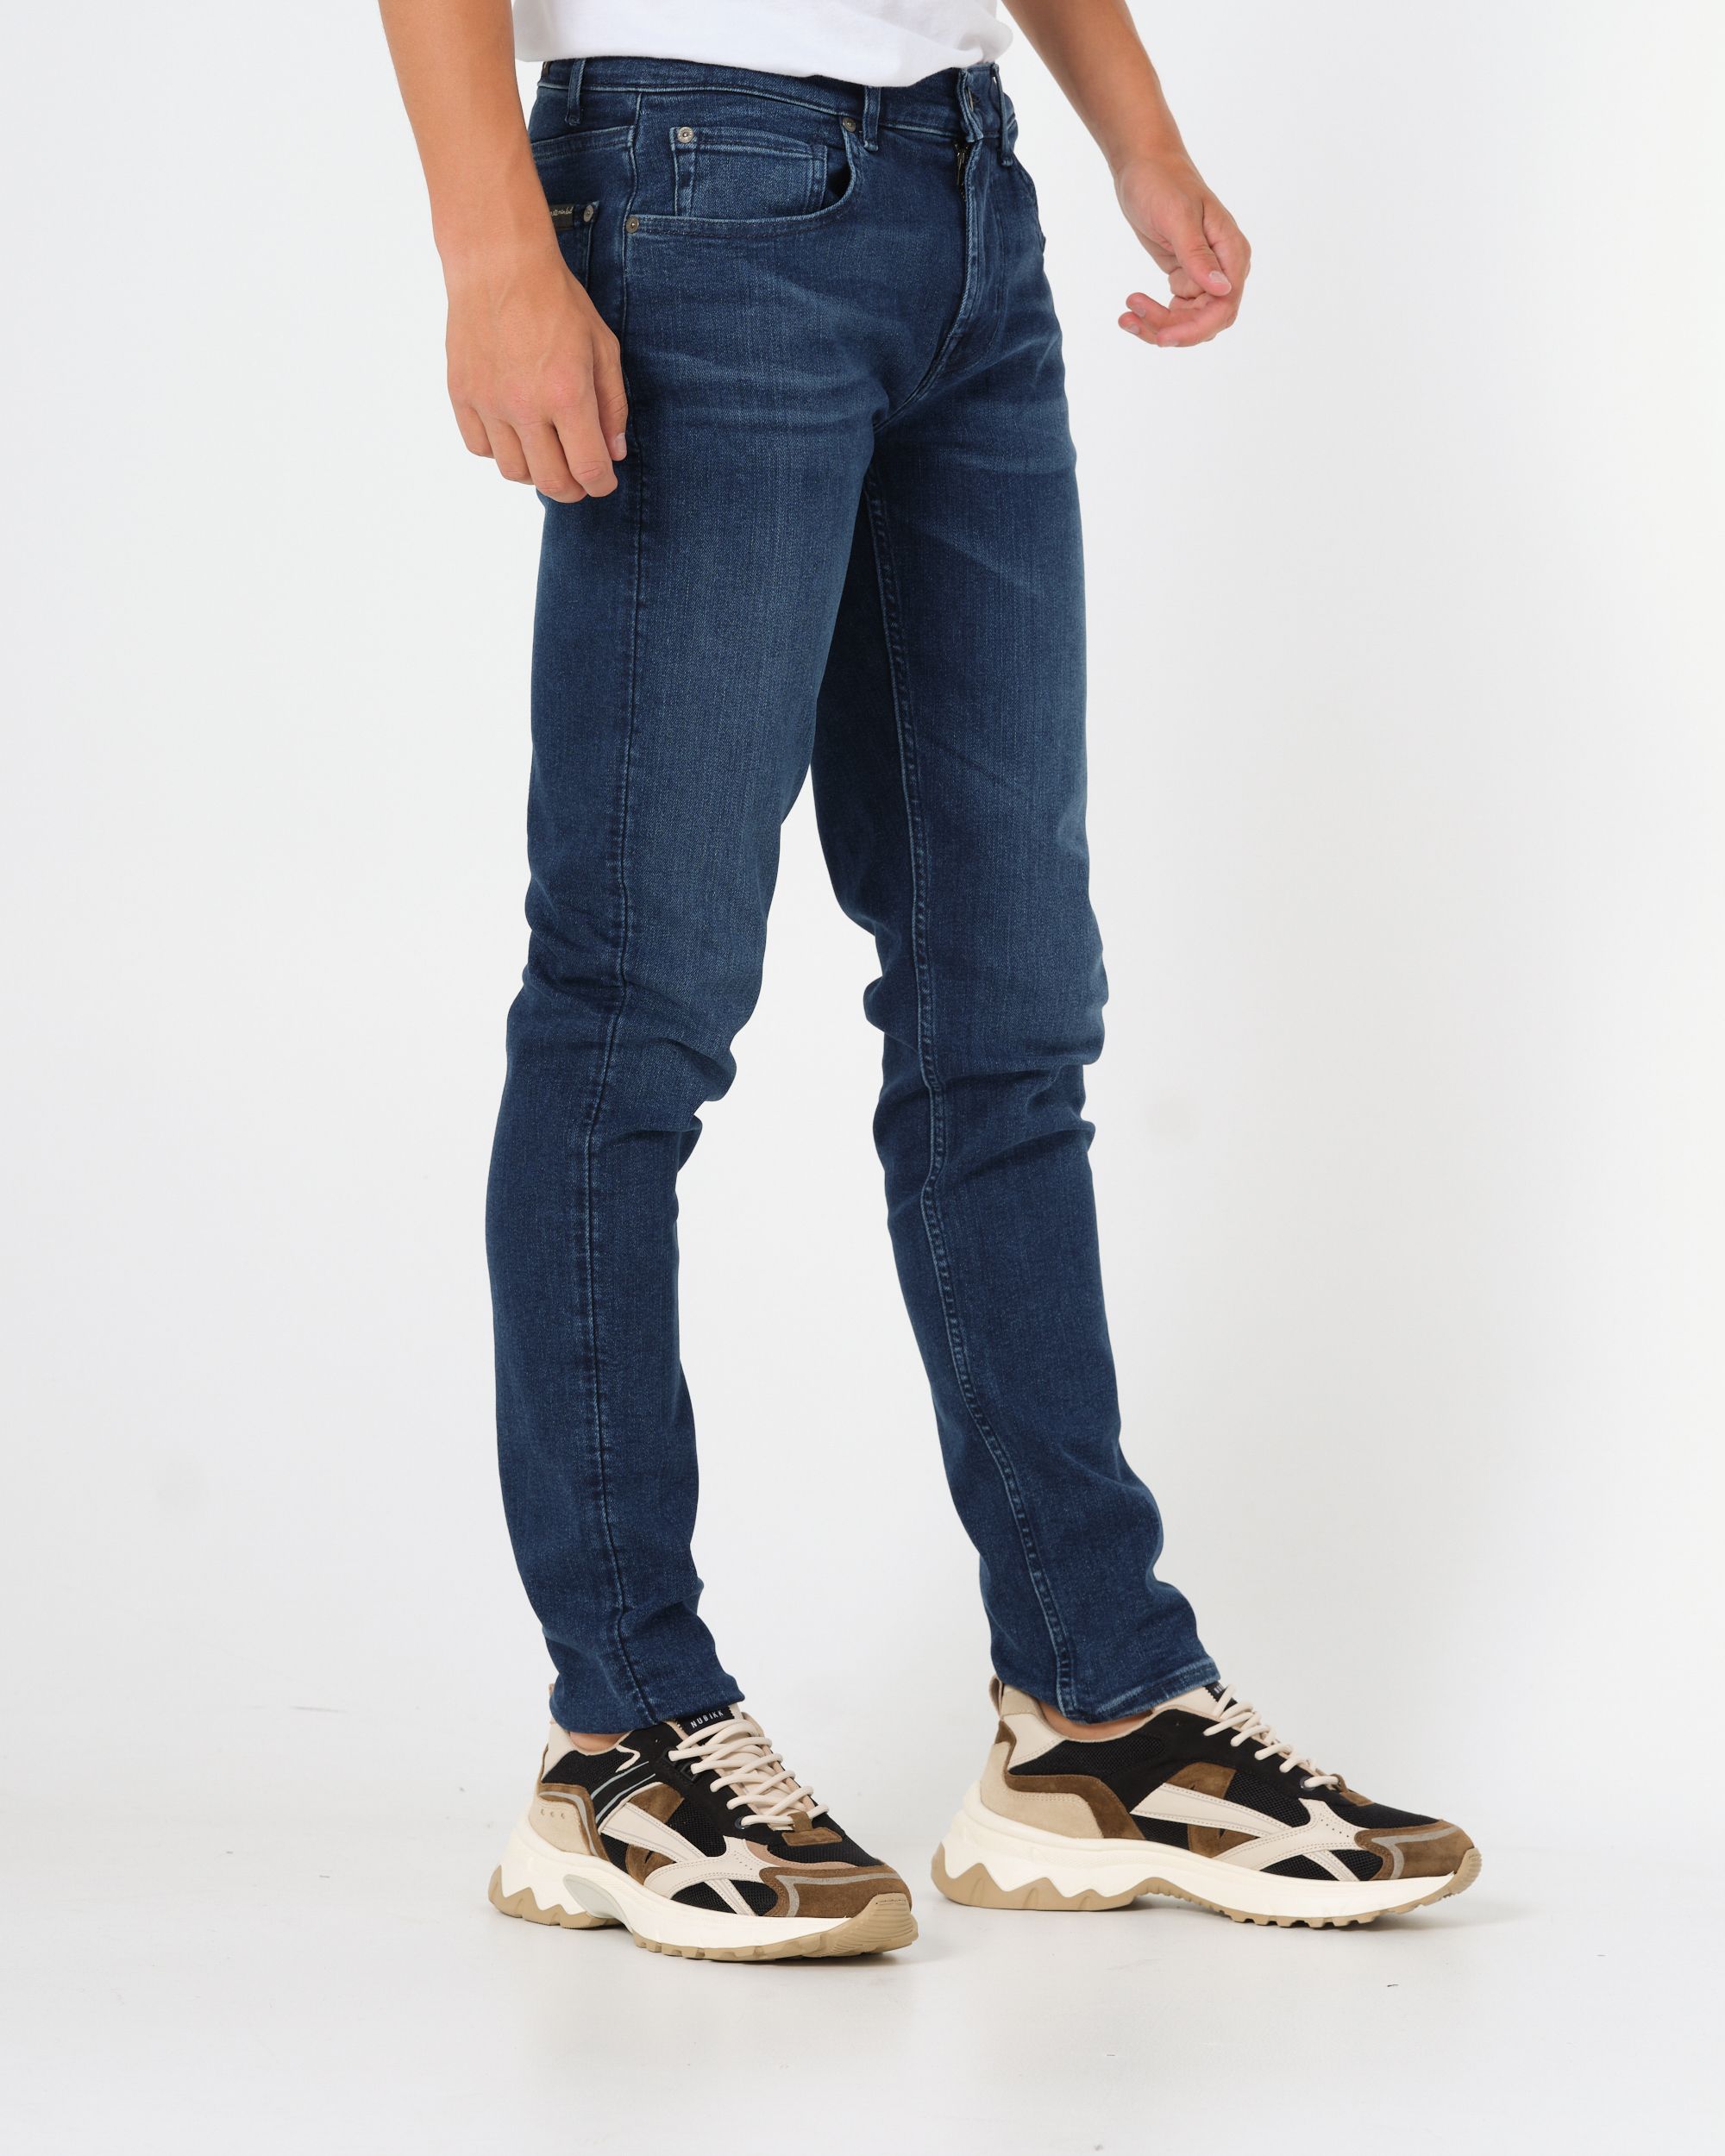 Seven for all mankind Rebus Jeans Donker blauw 089206-001-30